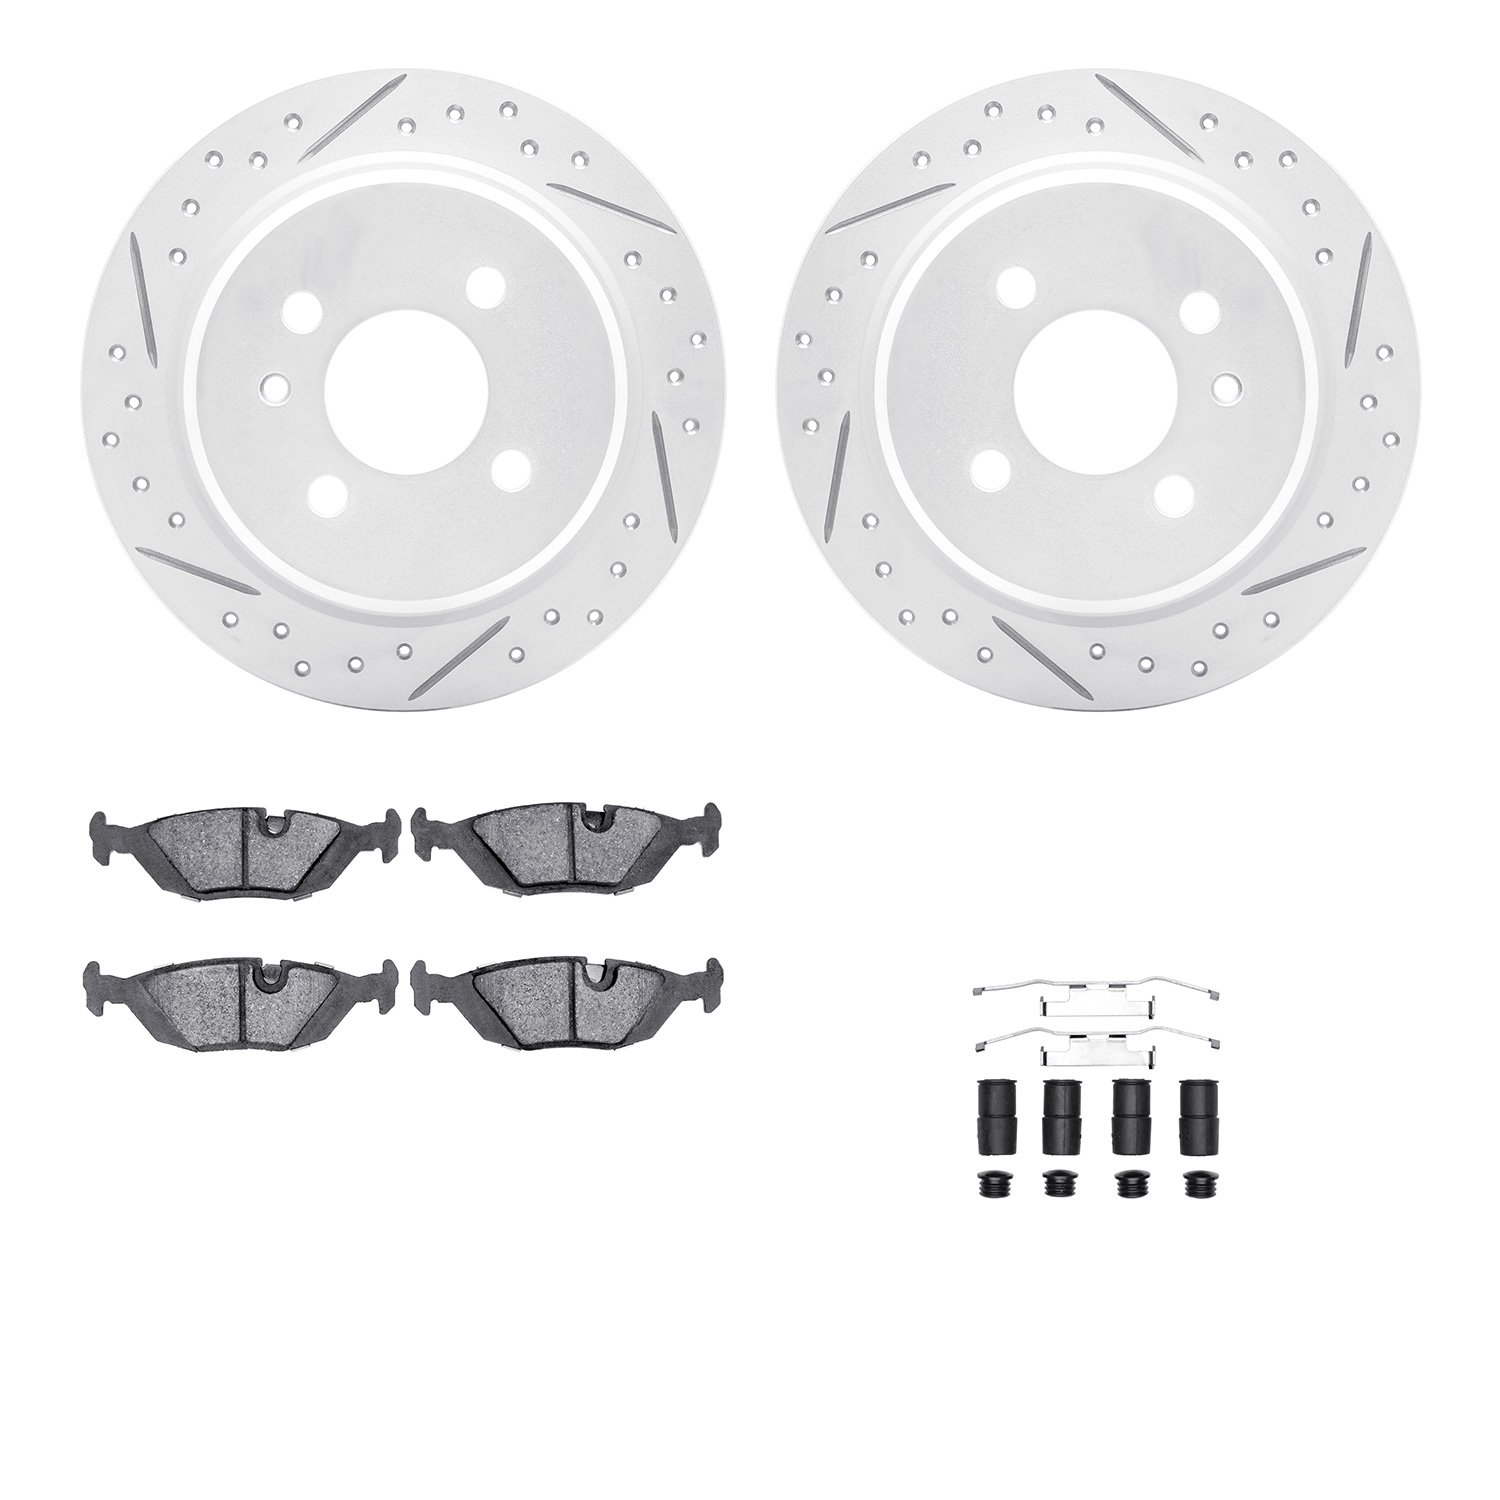 2512-31003 Geoperformance Drilled/Slotted Rotors w/5000 Advanced Brake Pads Kit & Hardware, 1984-1991 BMW, Position: Rear